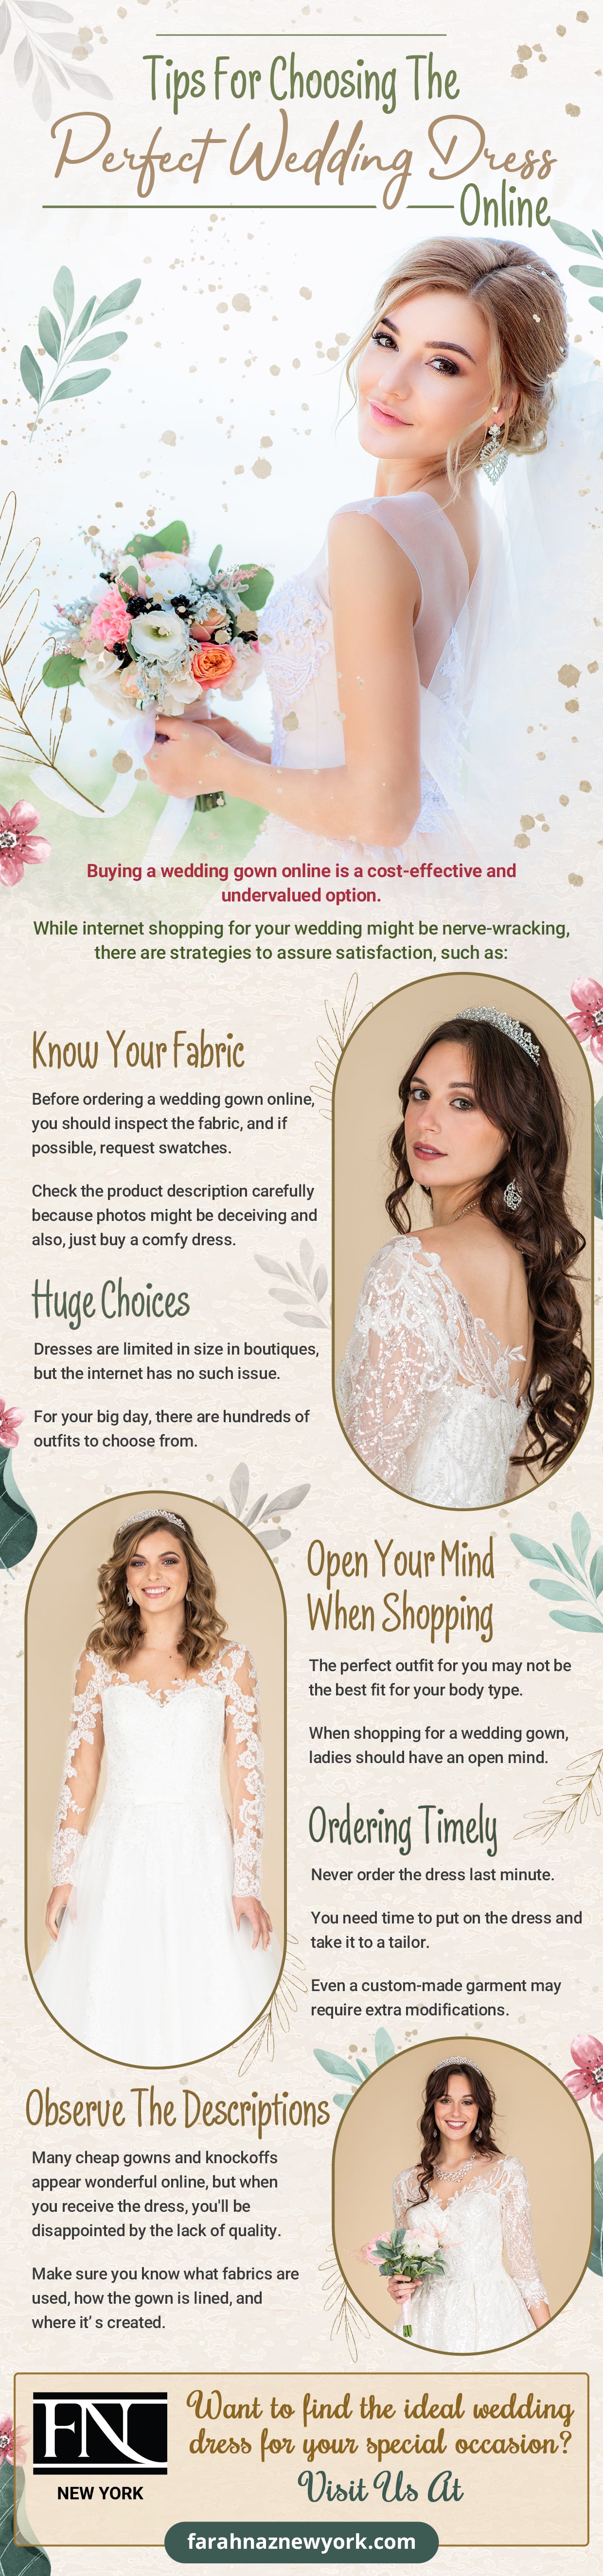 tips for choosing perfect wedding dress online